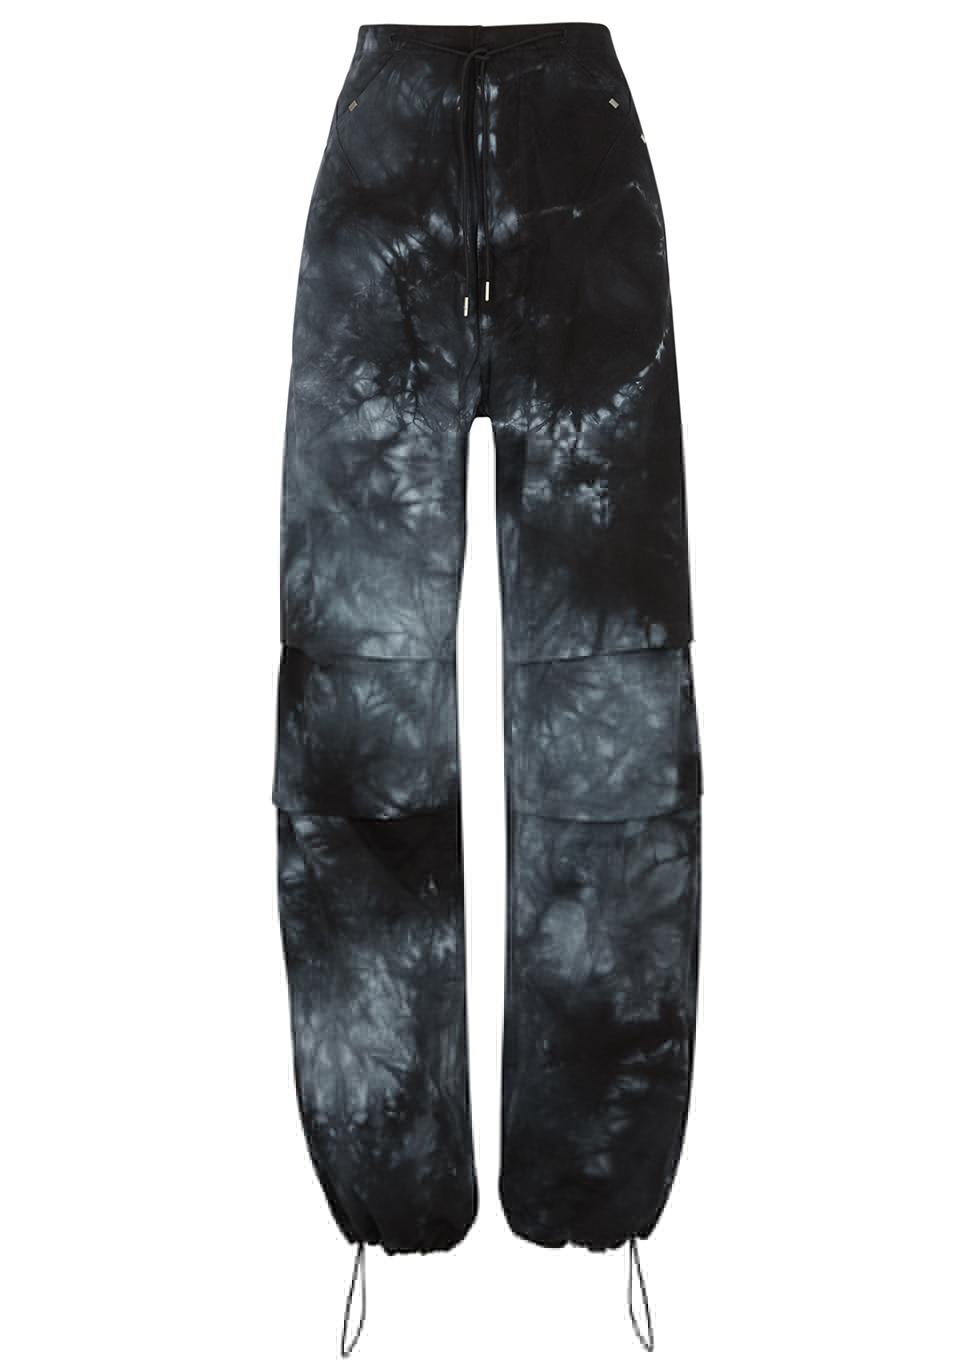 Daisy tie-dyed wide-leg cotton trousers by DARKPARK